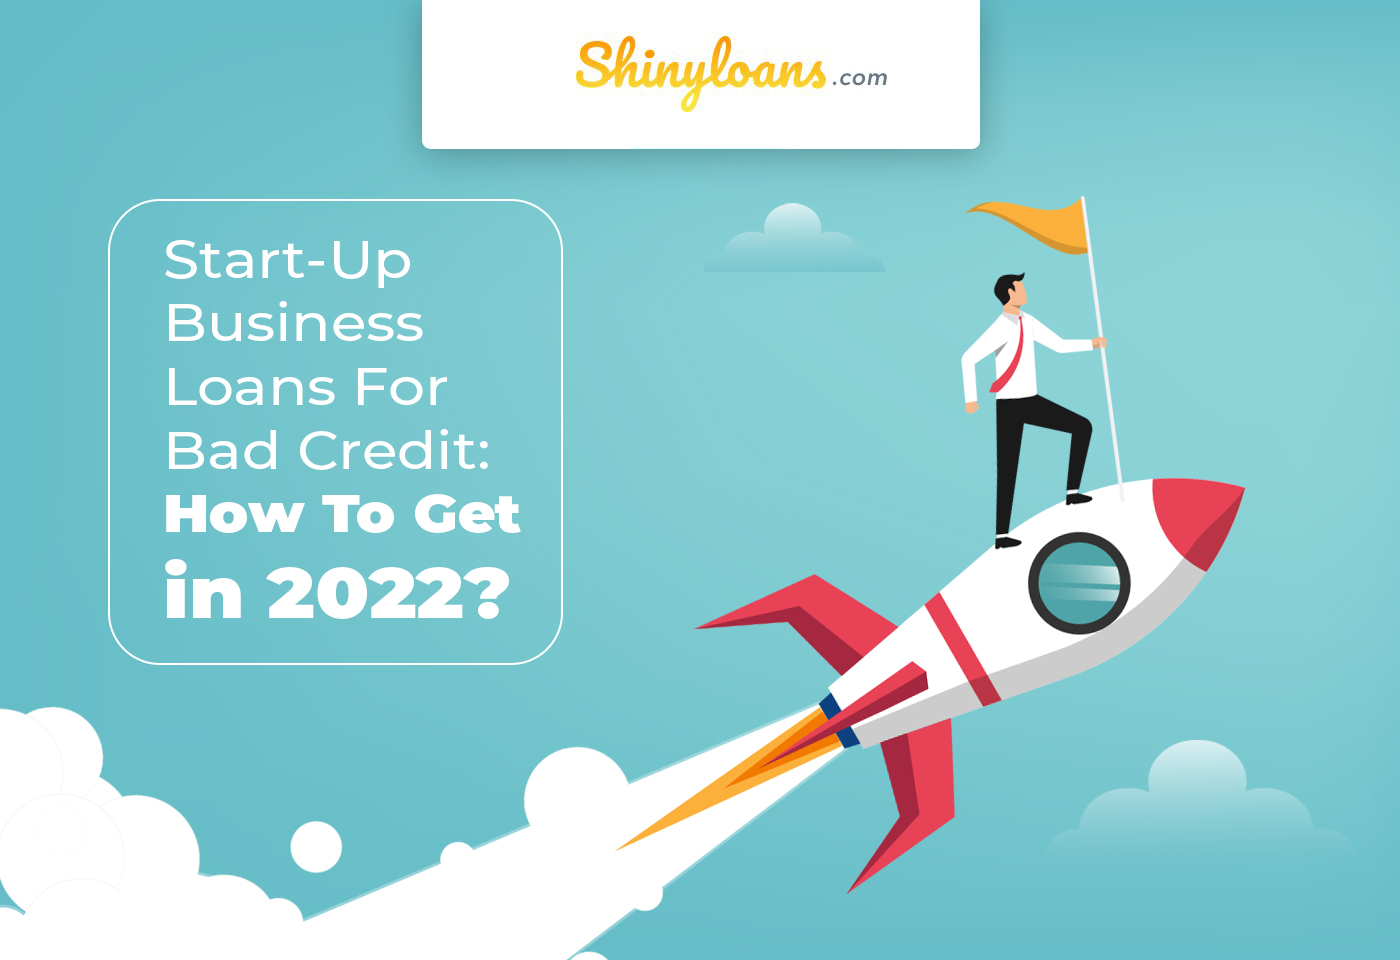 Start-Up Business Loans For Bad Credit: How To Get in 2022?